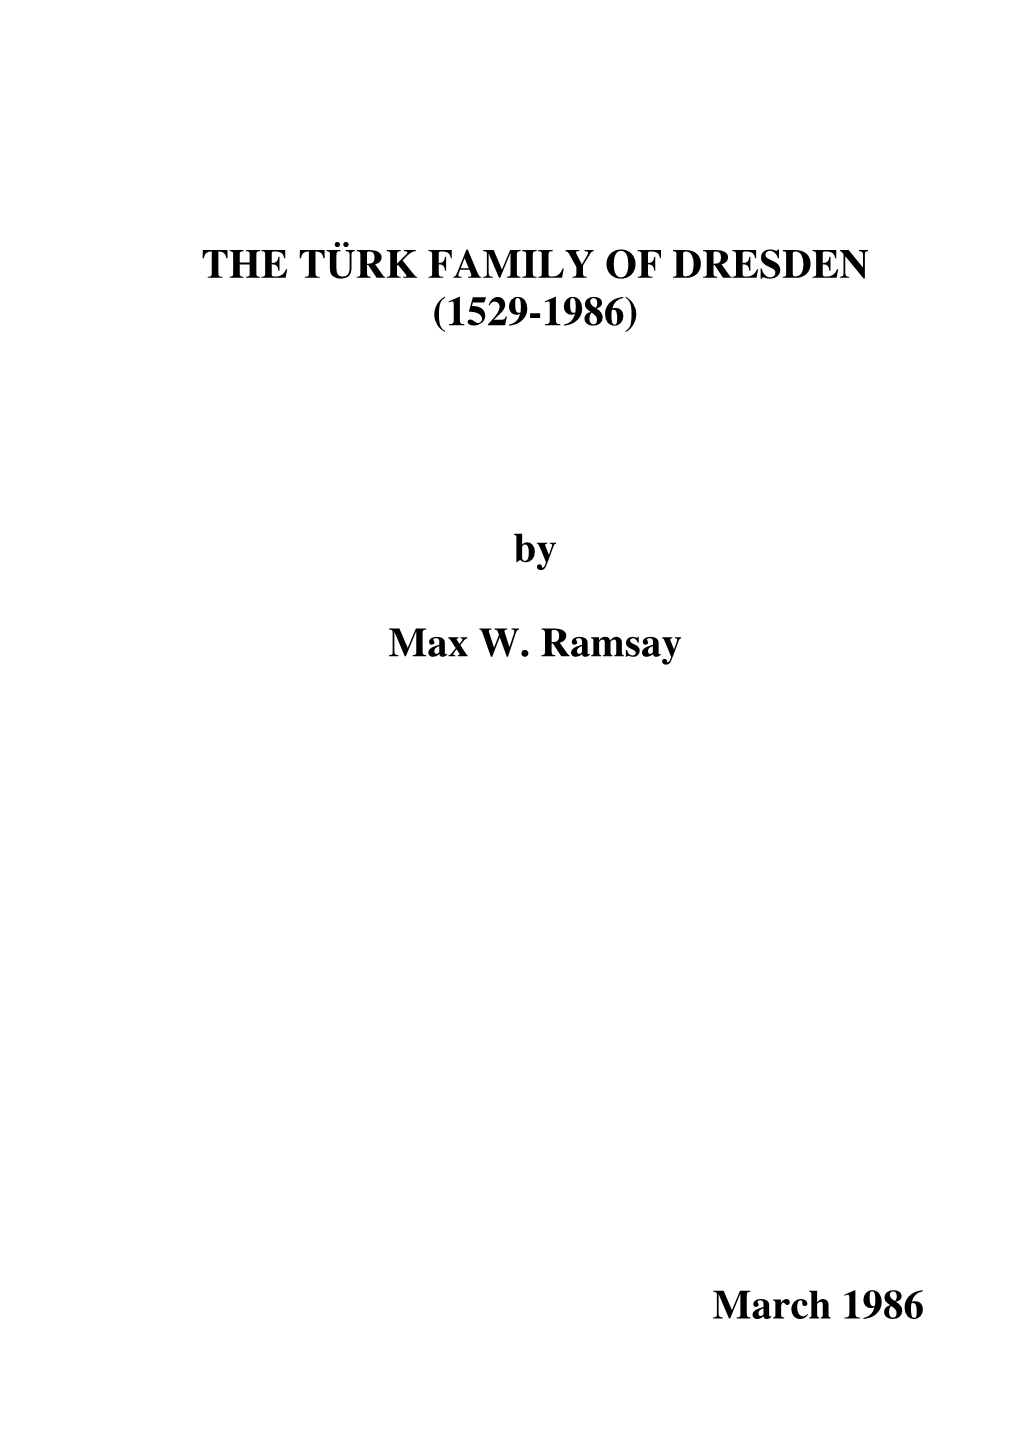 THE TÜRK FAMILY of DRESDEN (1529-1986) by Max W. Ramsay